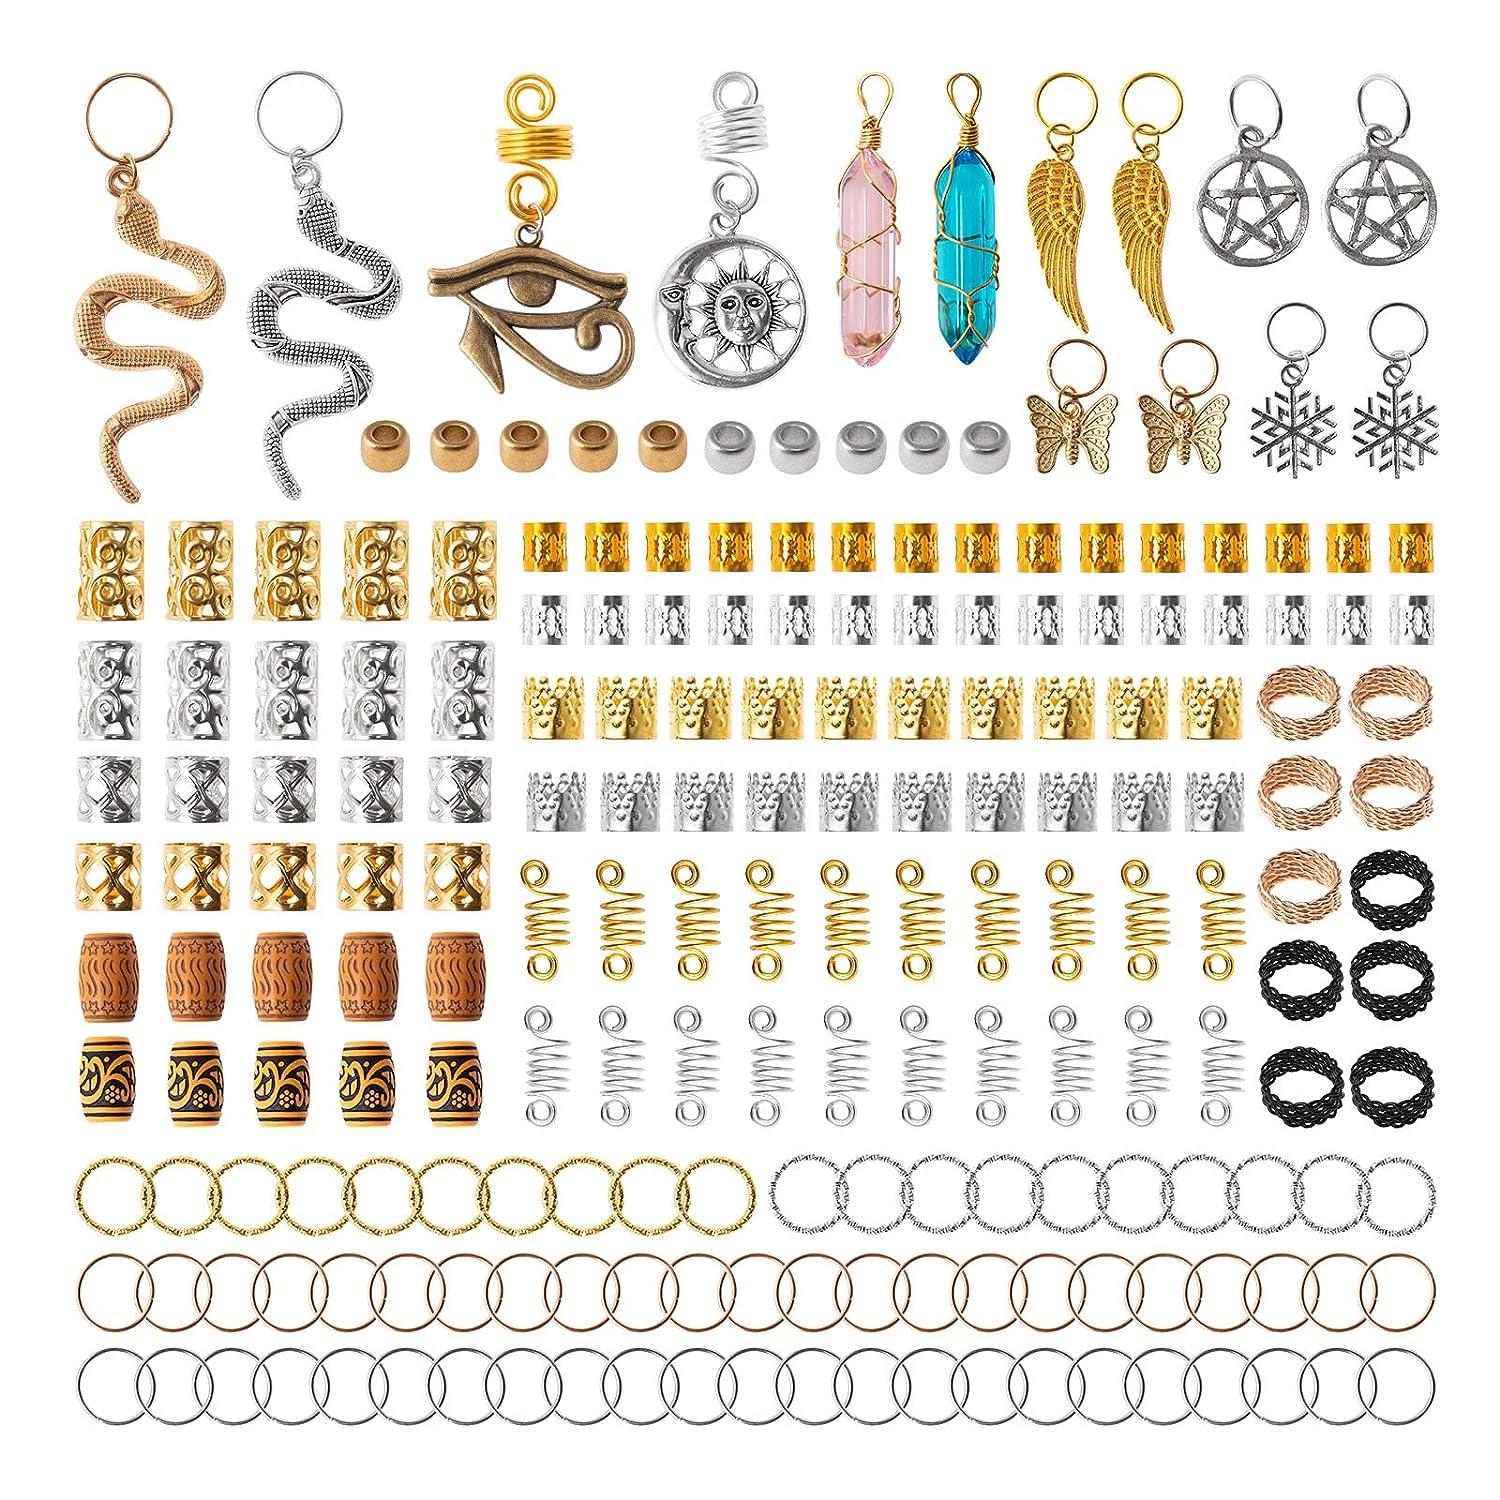 200 Pcs LOC Hair Jewelry for Braids Metal Gold and Silver Hair Charms for Women Hair Beads Rings Cuffs Dreadlocks Accessories Decoration